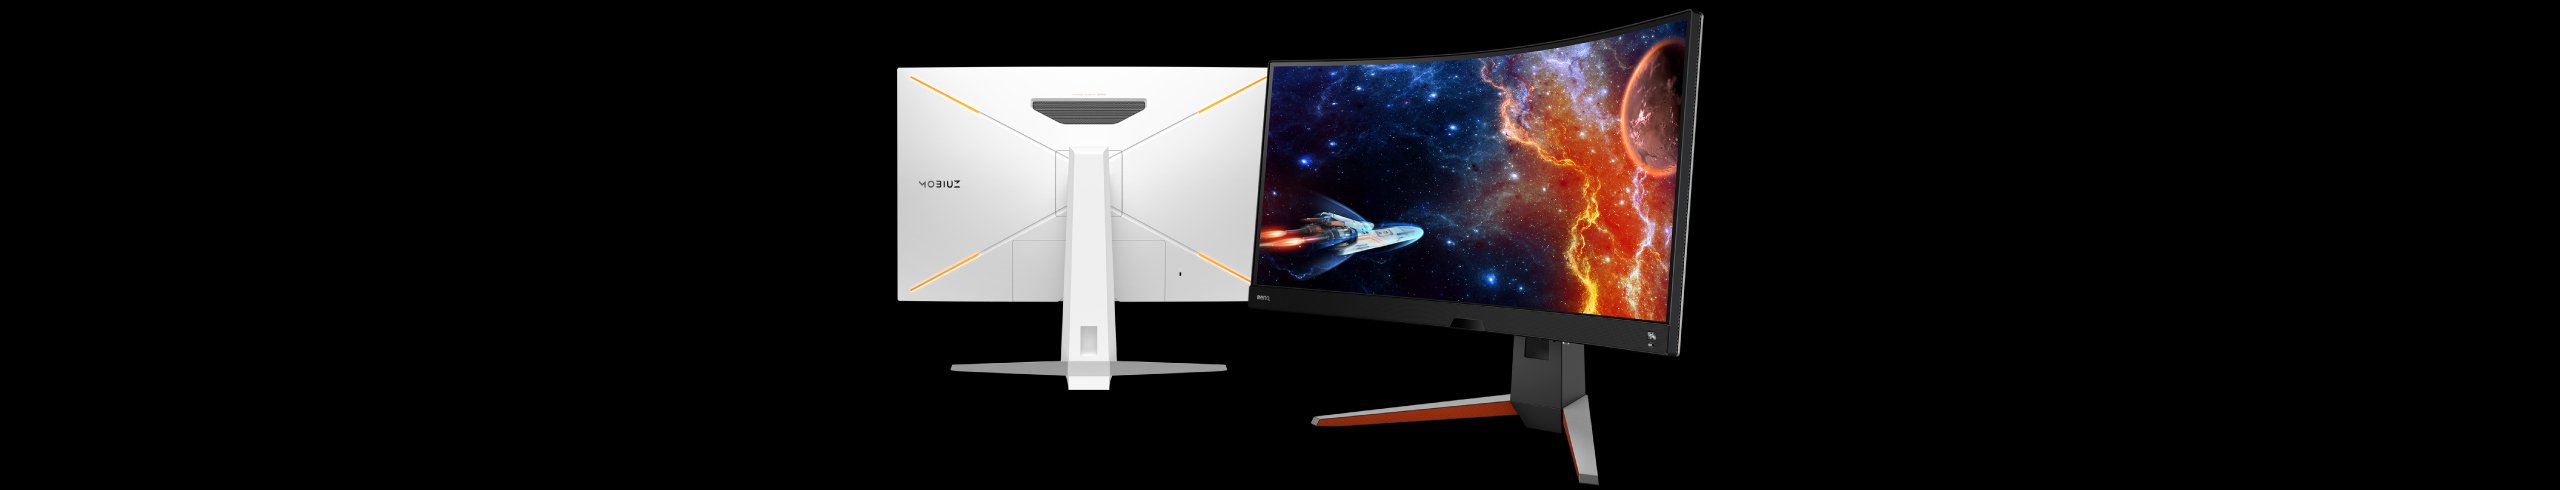 BenQ MOBIUZ gaming monitors provide total immersion in the game